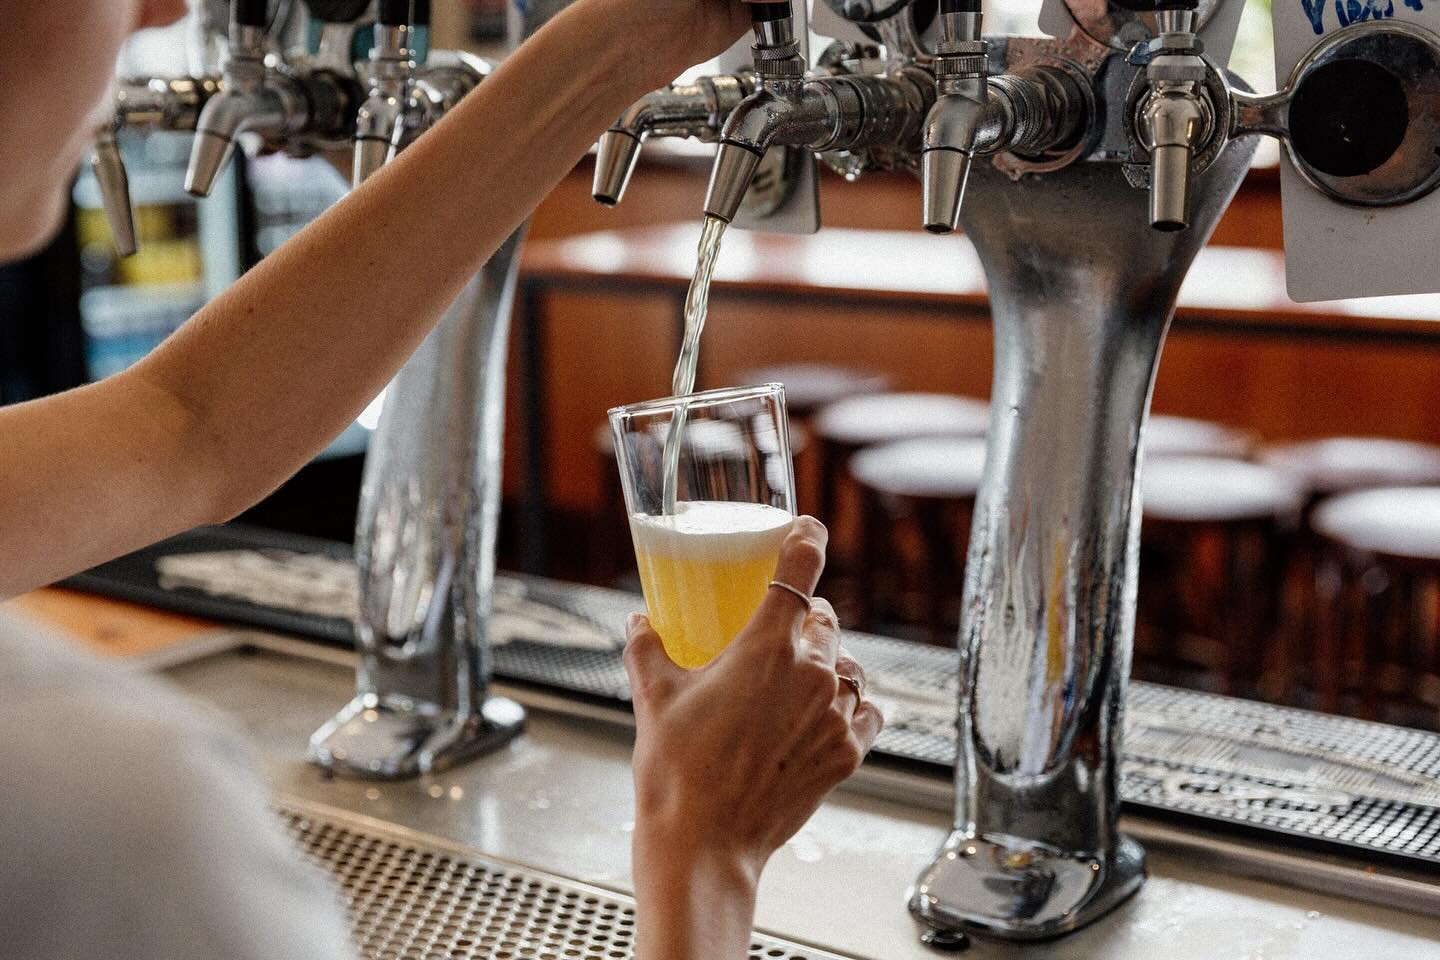 It&rsquo;s Thursday you know what that means? Time for a beverage or 3.

#craftbeer #craftbeers #indiebeer #pub #themiltonhotel #beers #beer #thirstythursday #milton #goodbeer